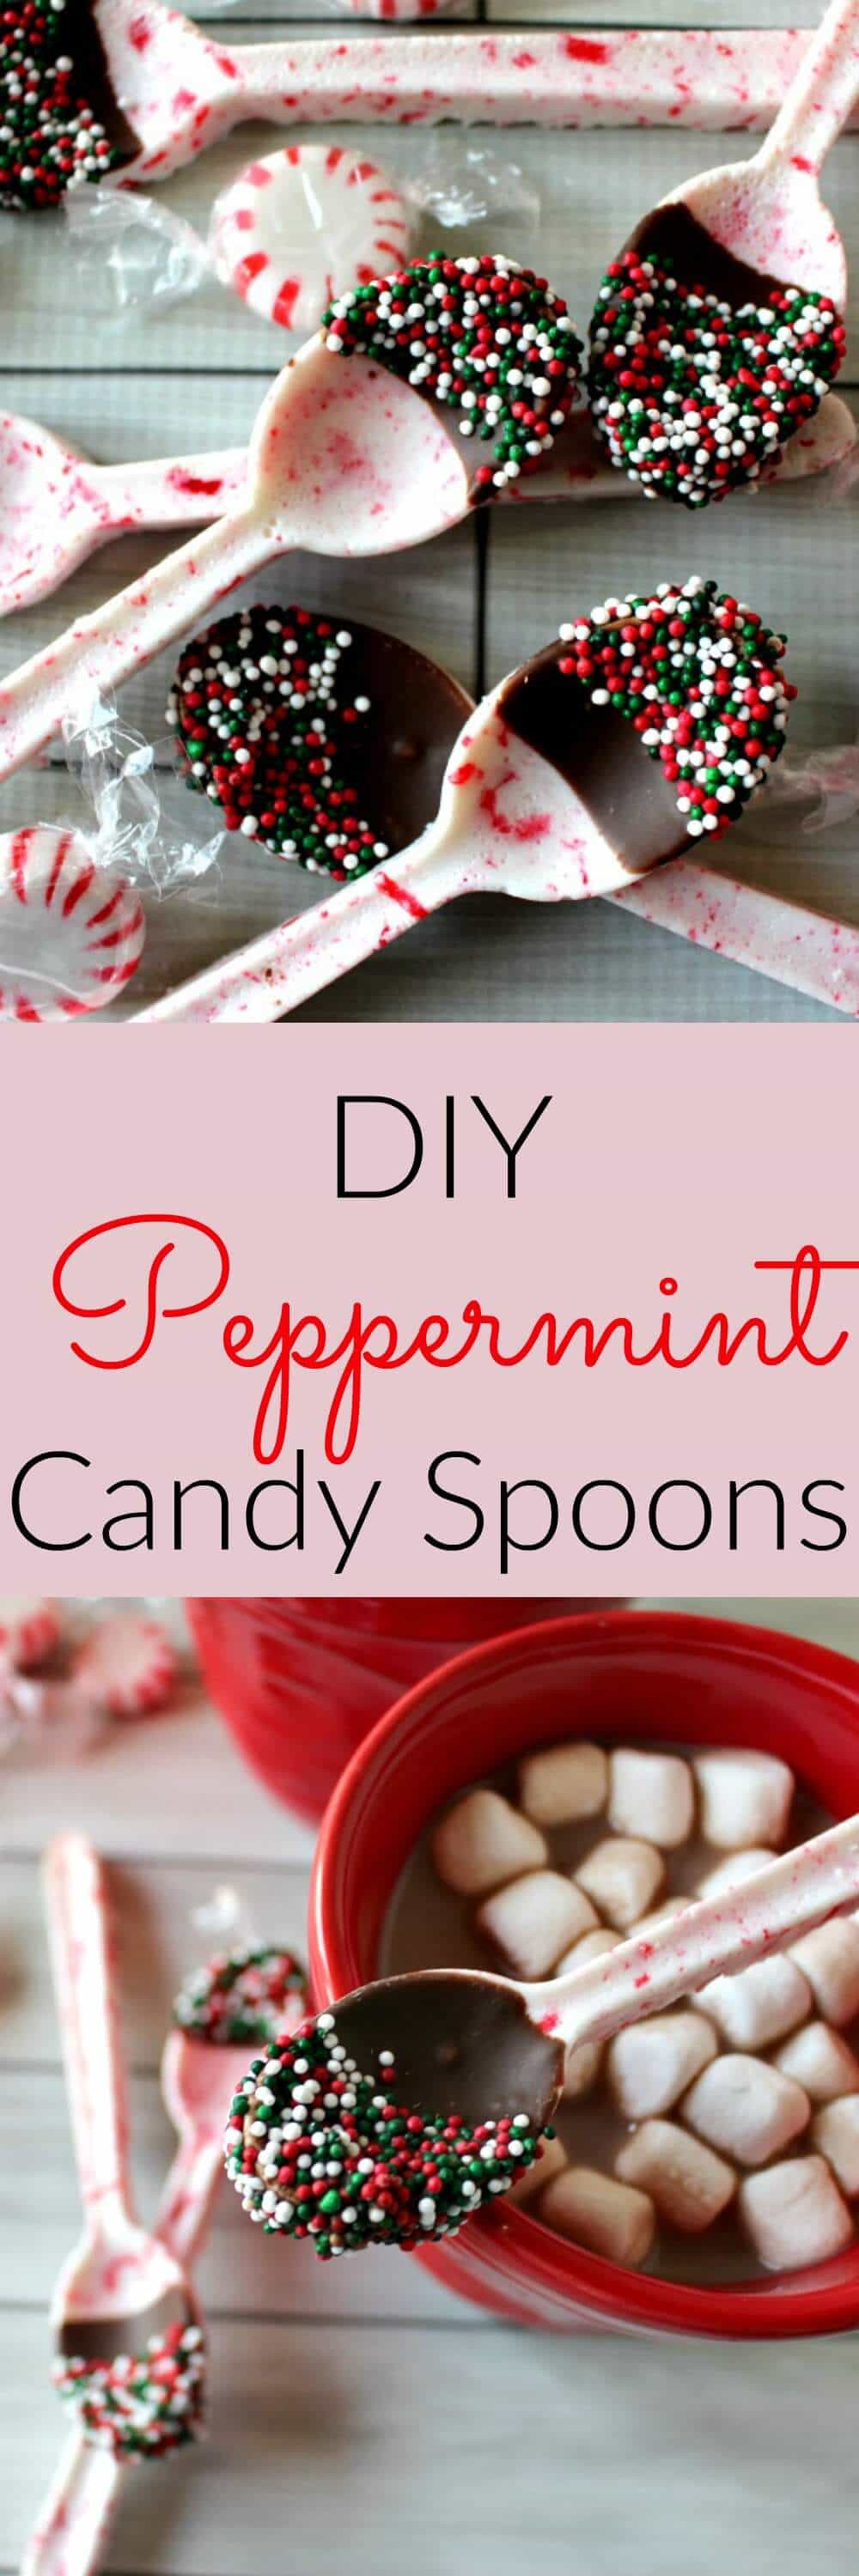 Candy Gifts For Christmas
 DIY Peppermint Candy Spoons Princess Pinky Girl